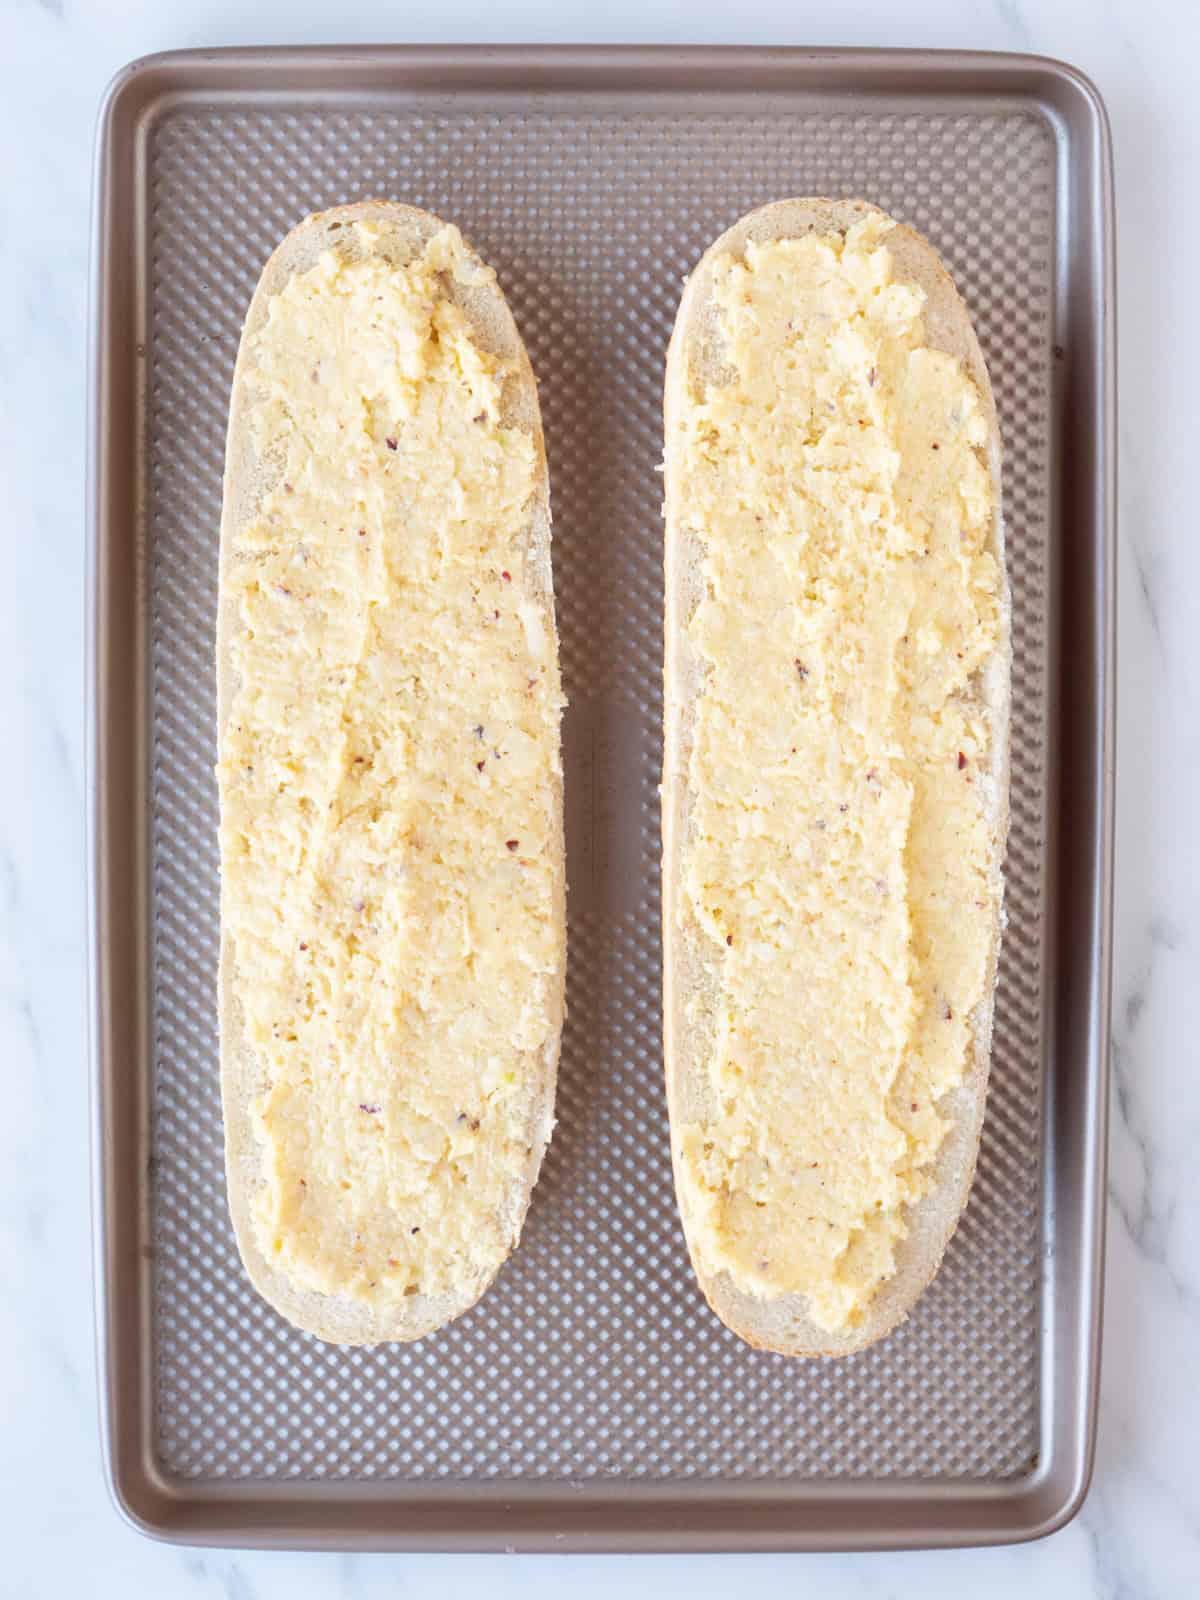 Horizontally cut halves of a bread loaf on a baking sheet, with the butter cheese garlic red pepper flakes mixture spread evenly on both, ready to bake.